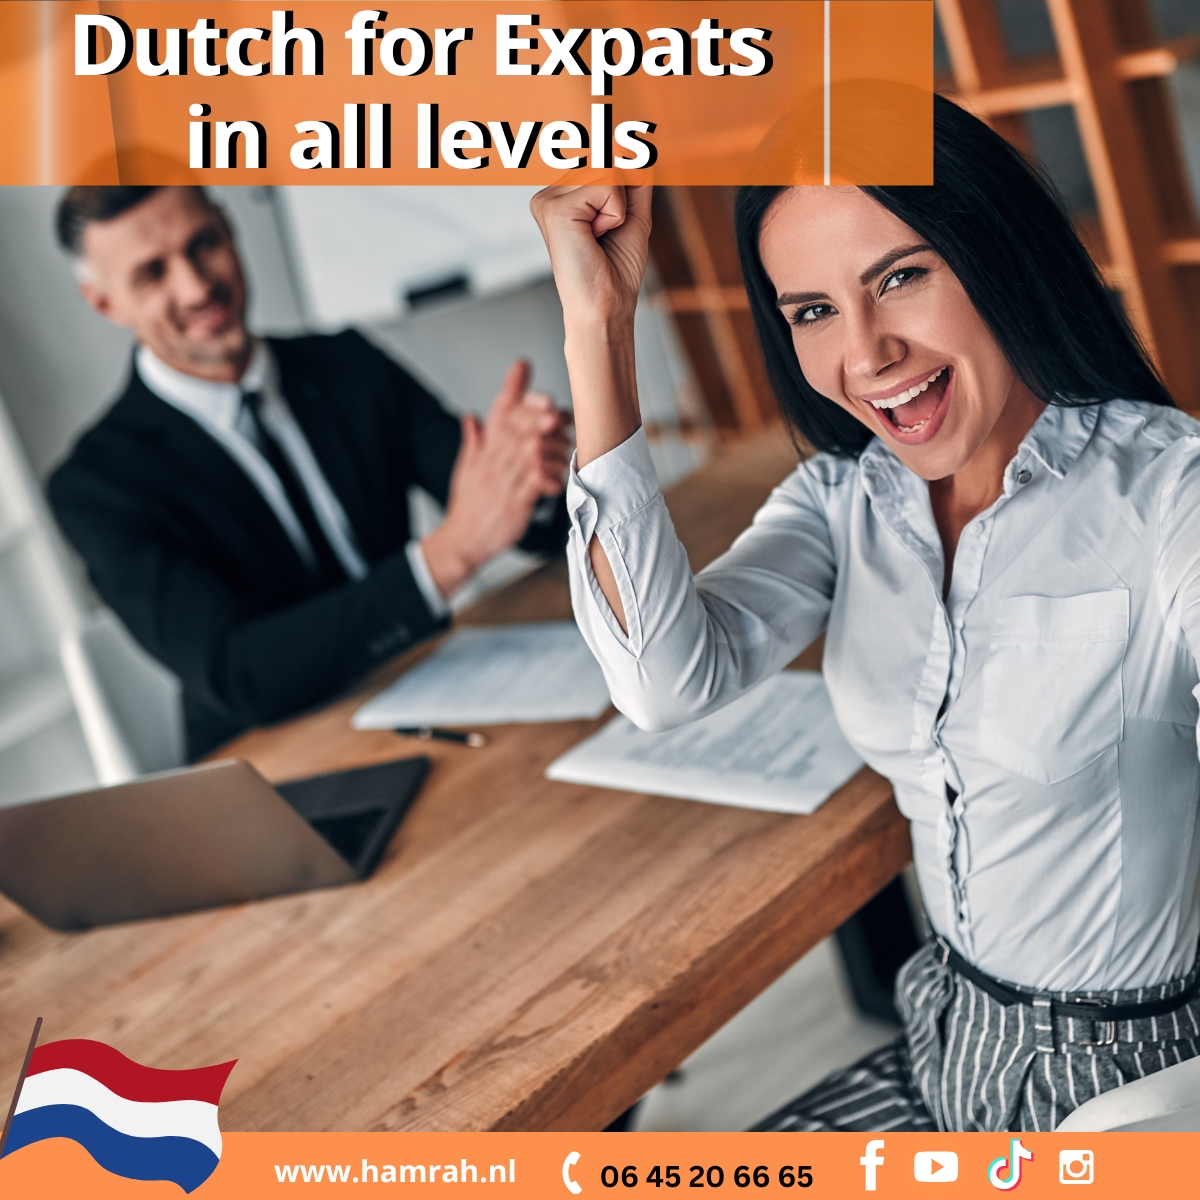 Dutch for Expats